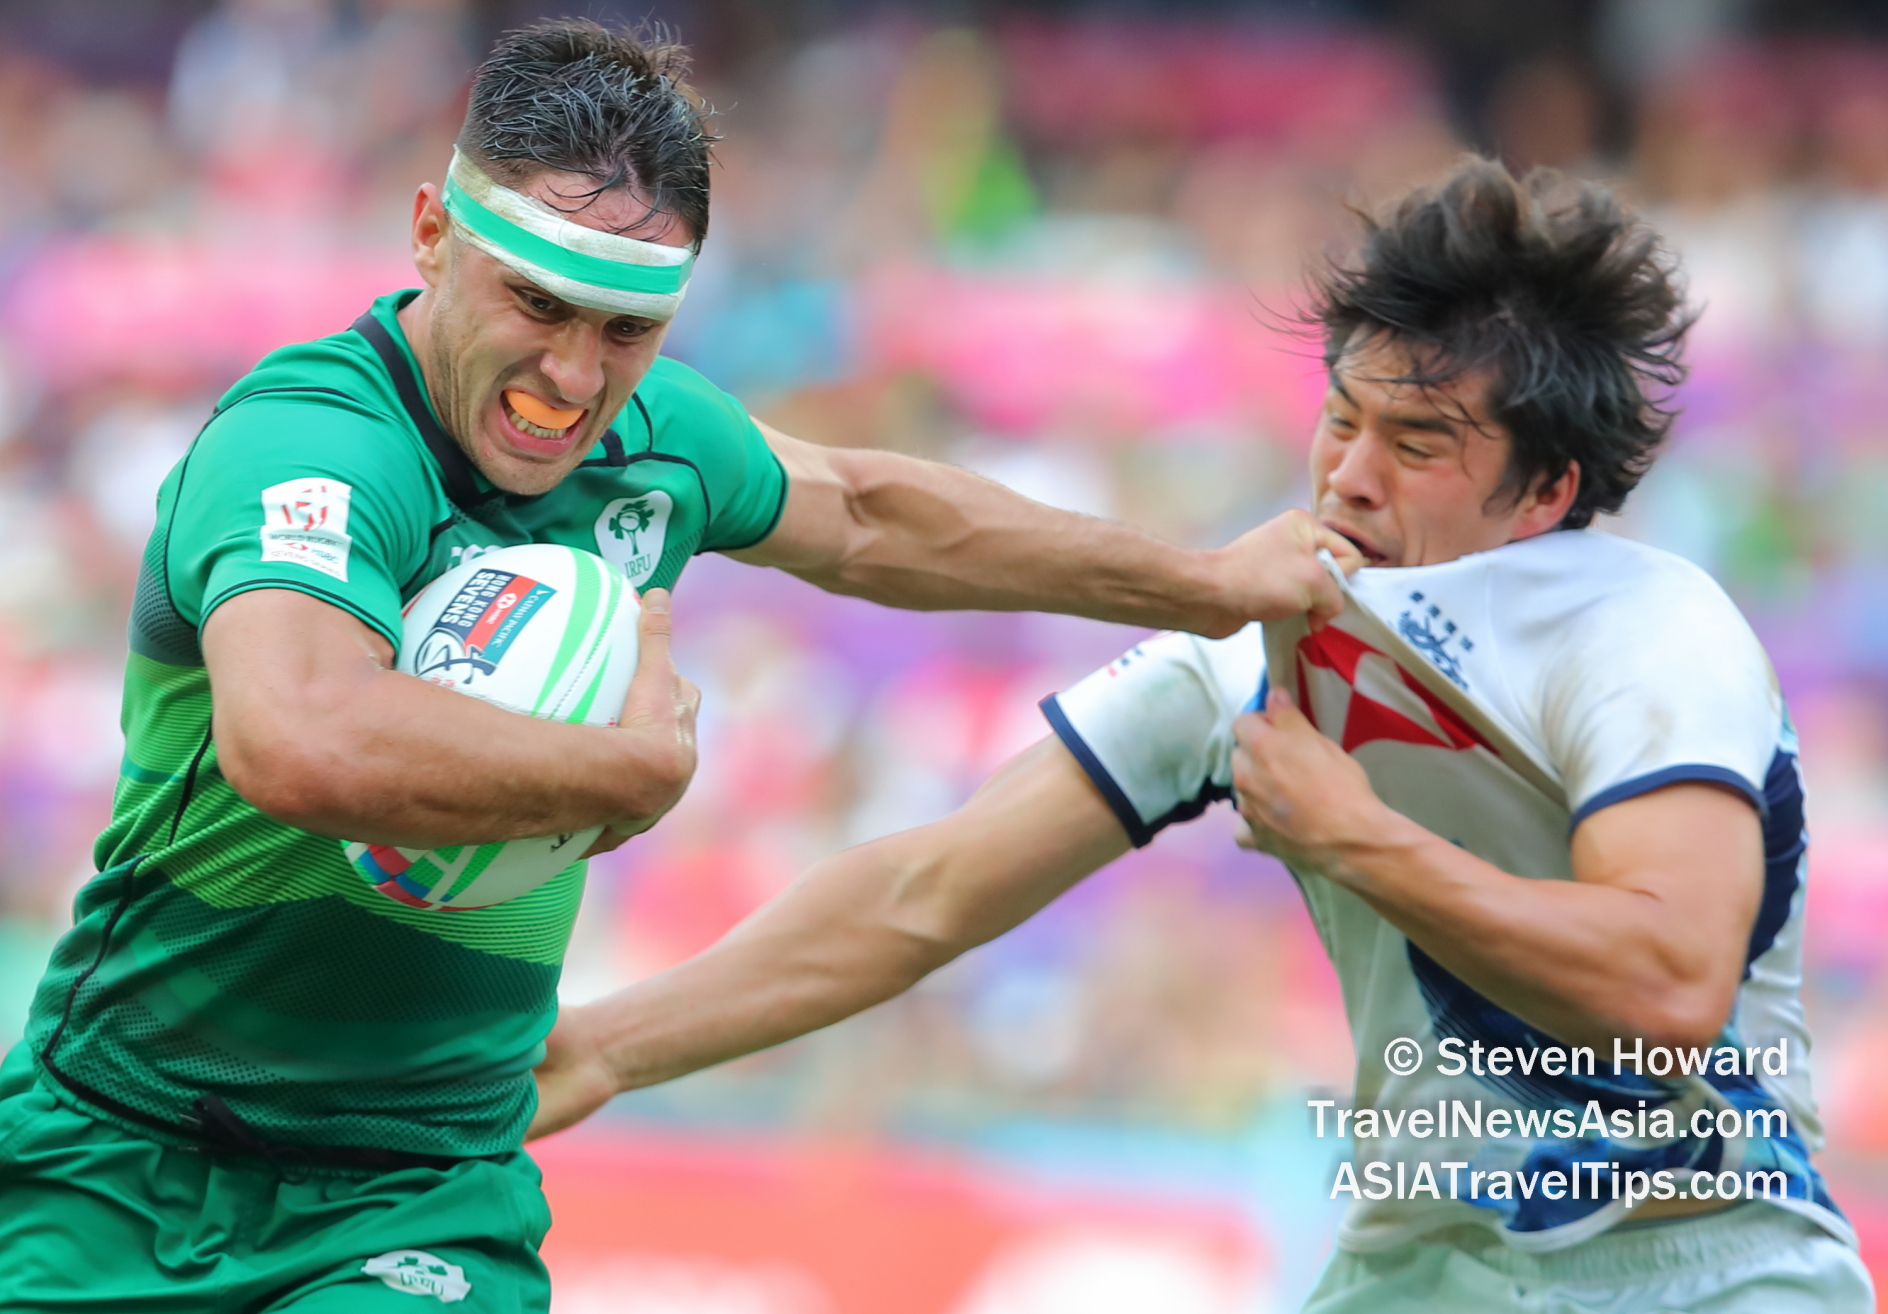 Ireland in action at Hong Kong Sevens 2019. Picture by Steven Howard of TravelNewsAsia.com Click to enlarge.